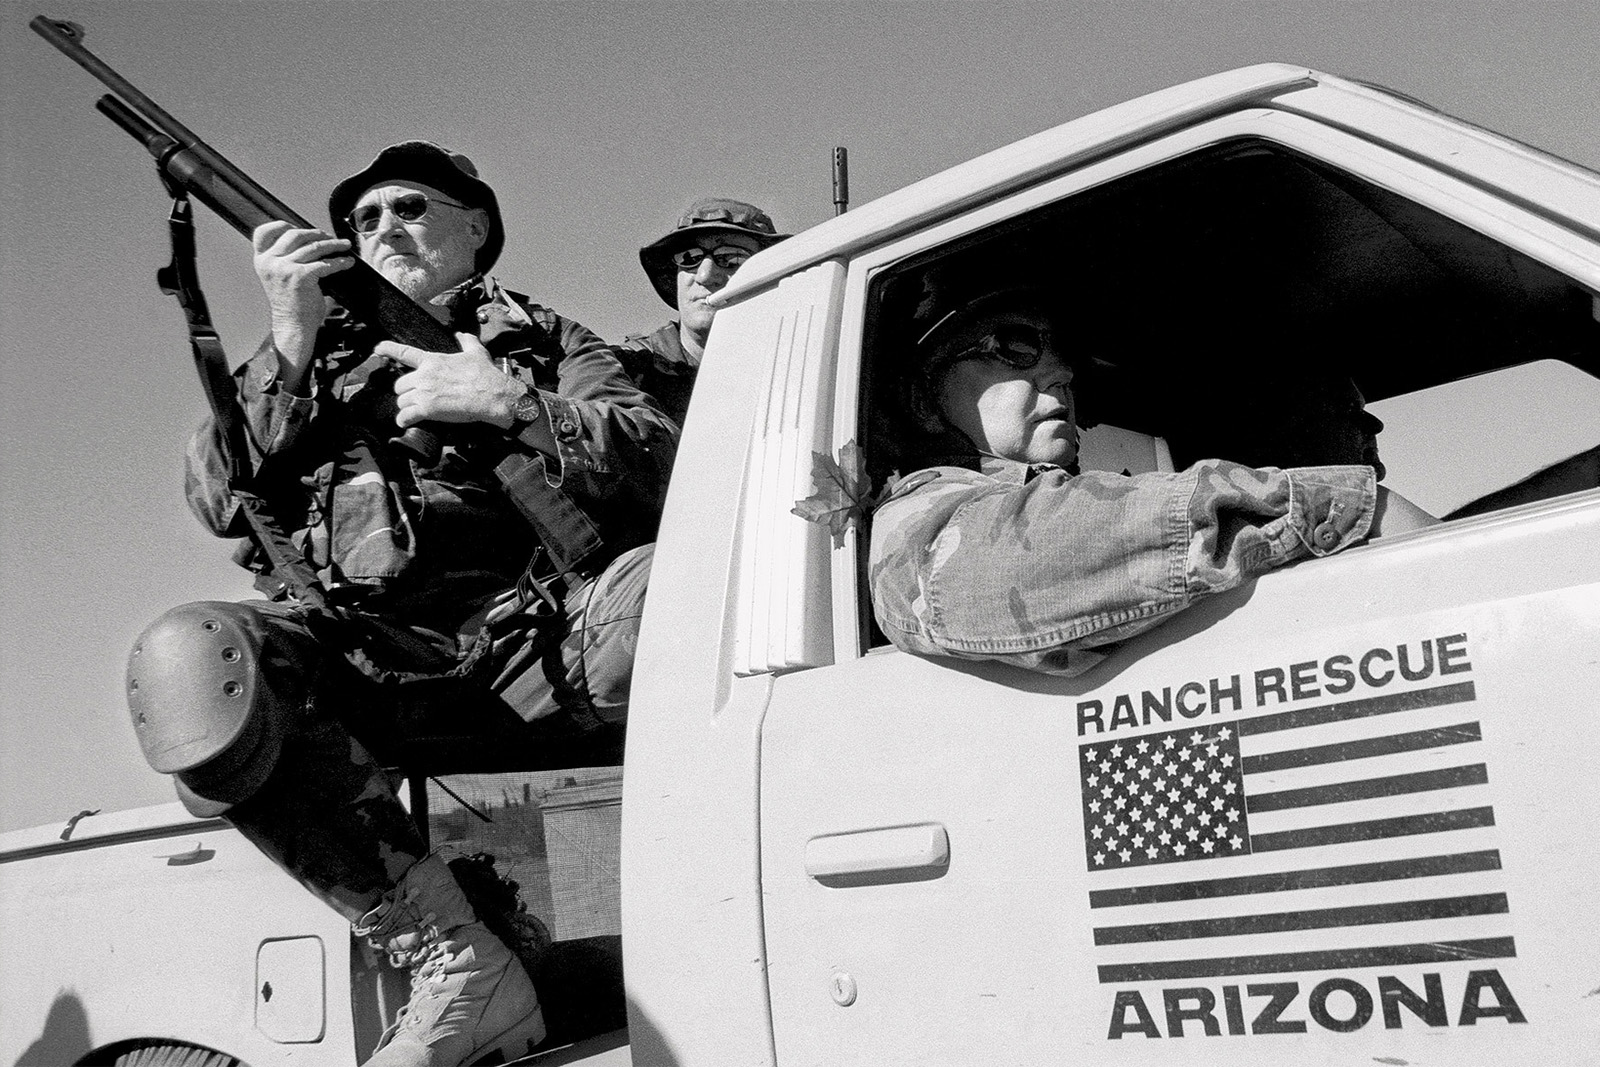 Right-wing vigilantes on US/Mexico border, by Seattle photojournalist Mike Kane editorial photographer